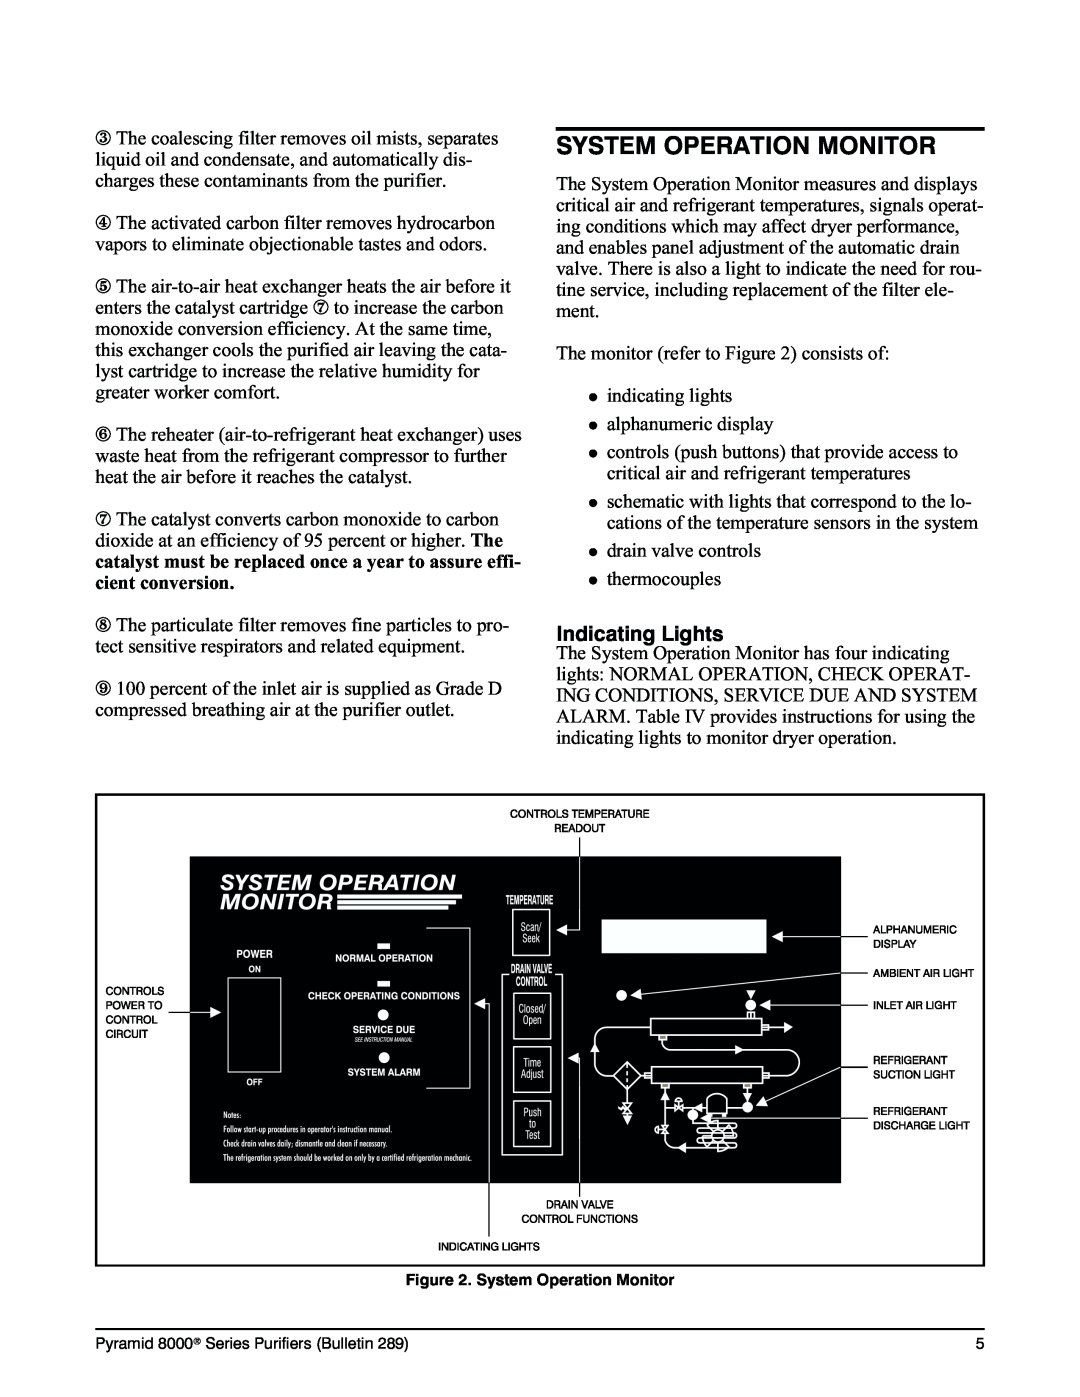 Deltech Fitness 8000 instruction manual System Operation Monitor, Indicating Lights 